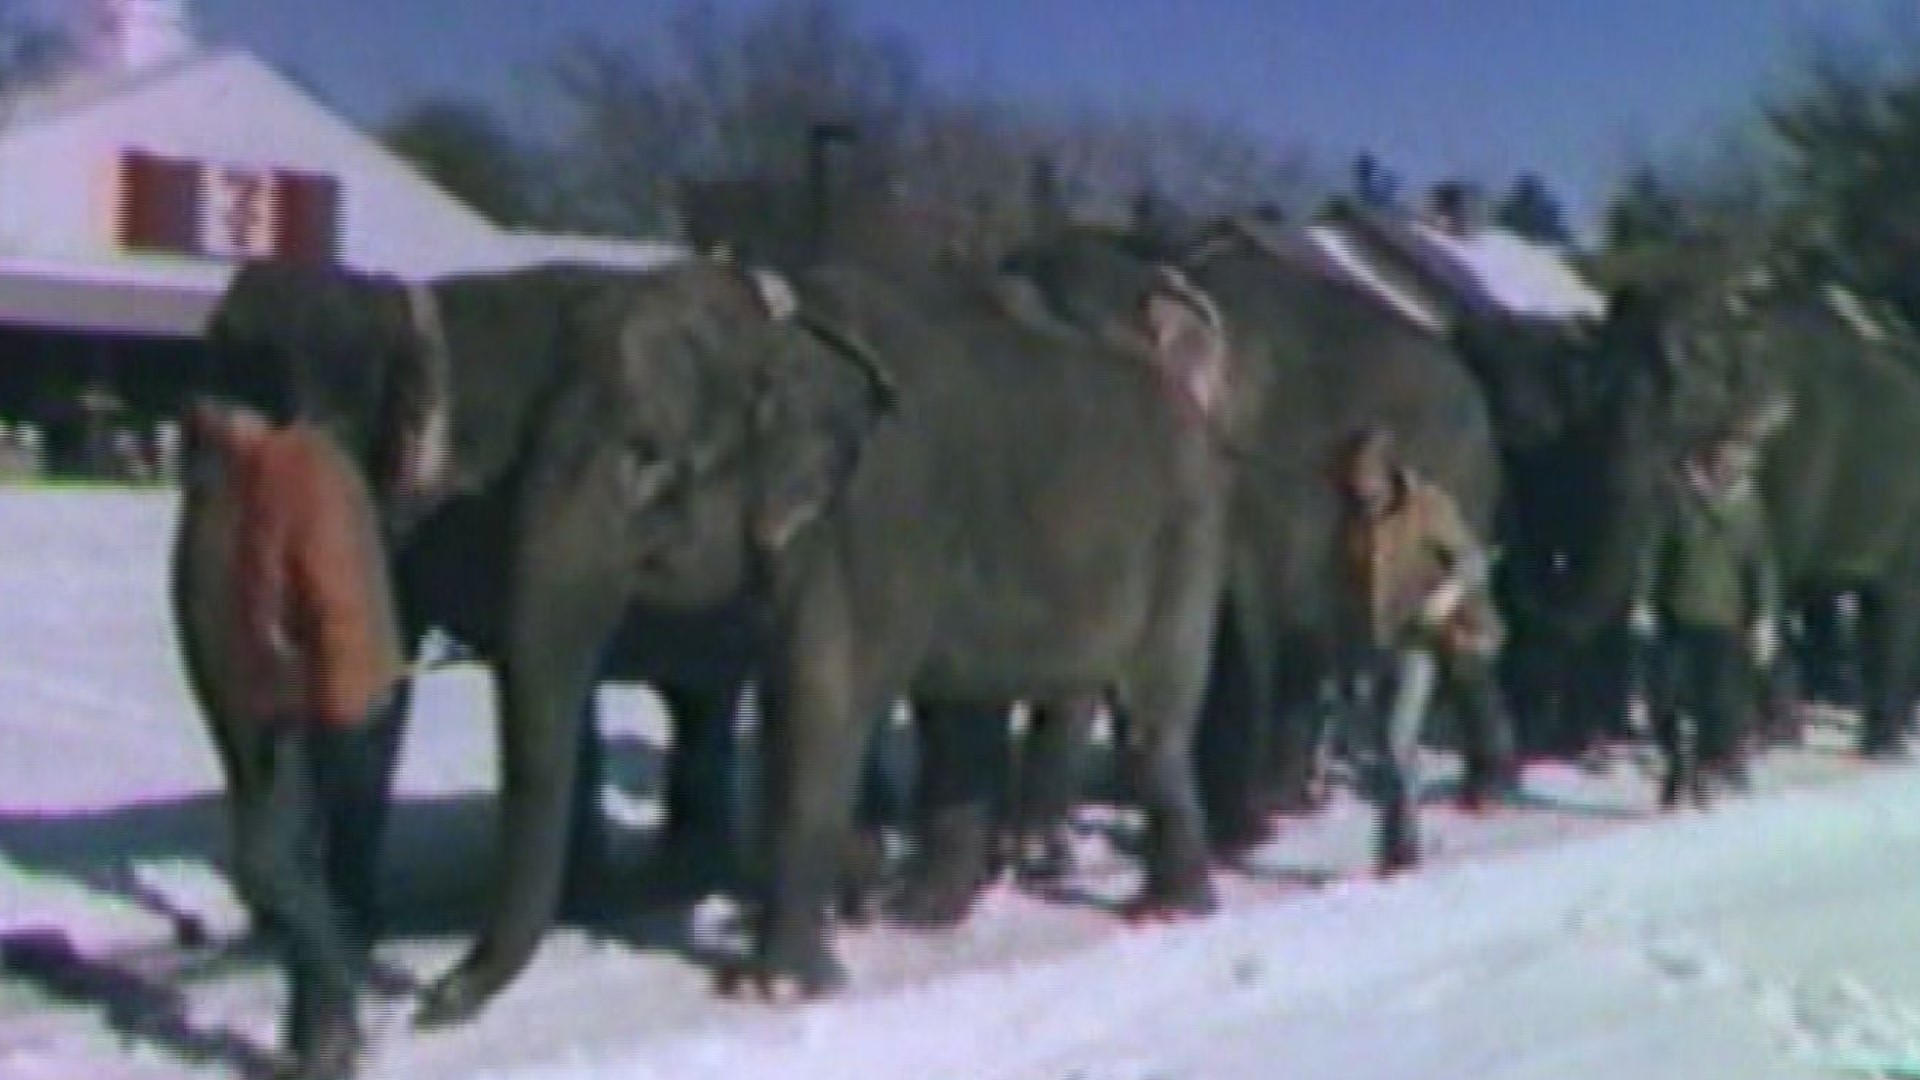 Over 40 years ago the circus came to town and not far behind it, along came a blizzard.  The "Circus Blizzard of 1980" dumped nearly 14 inches of snow in Norfolk.